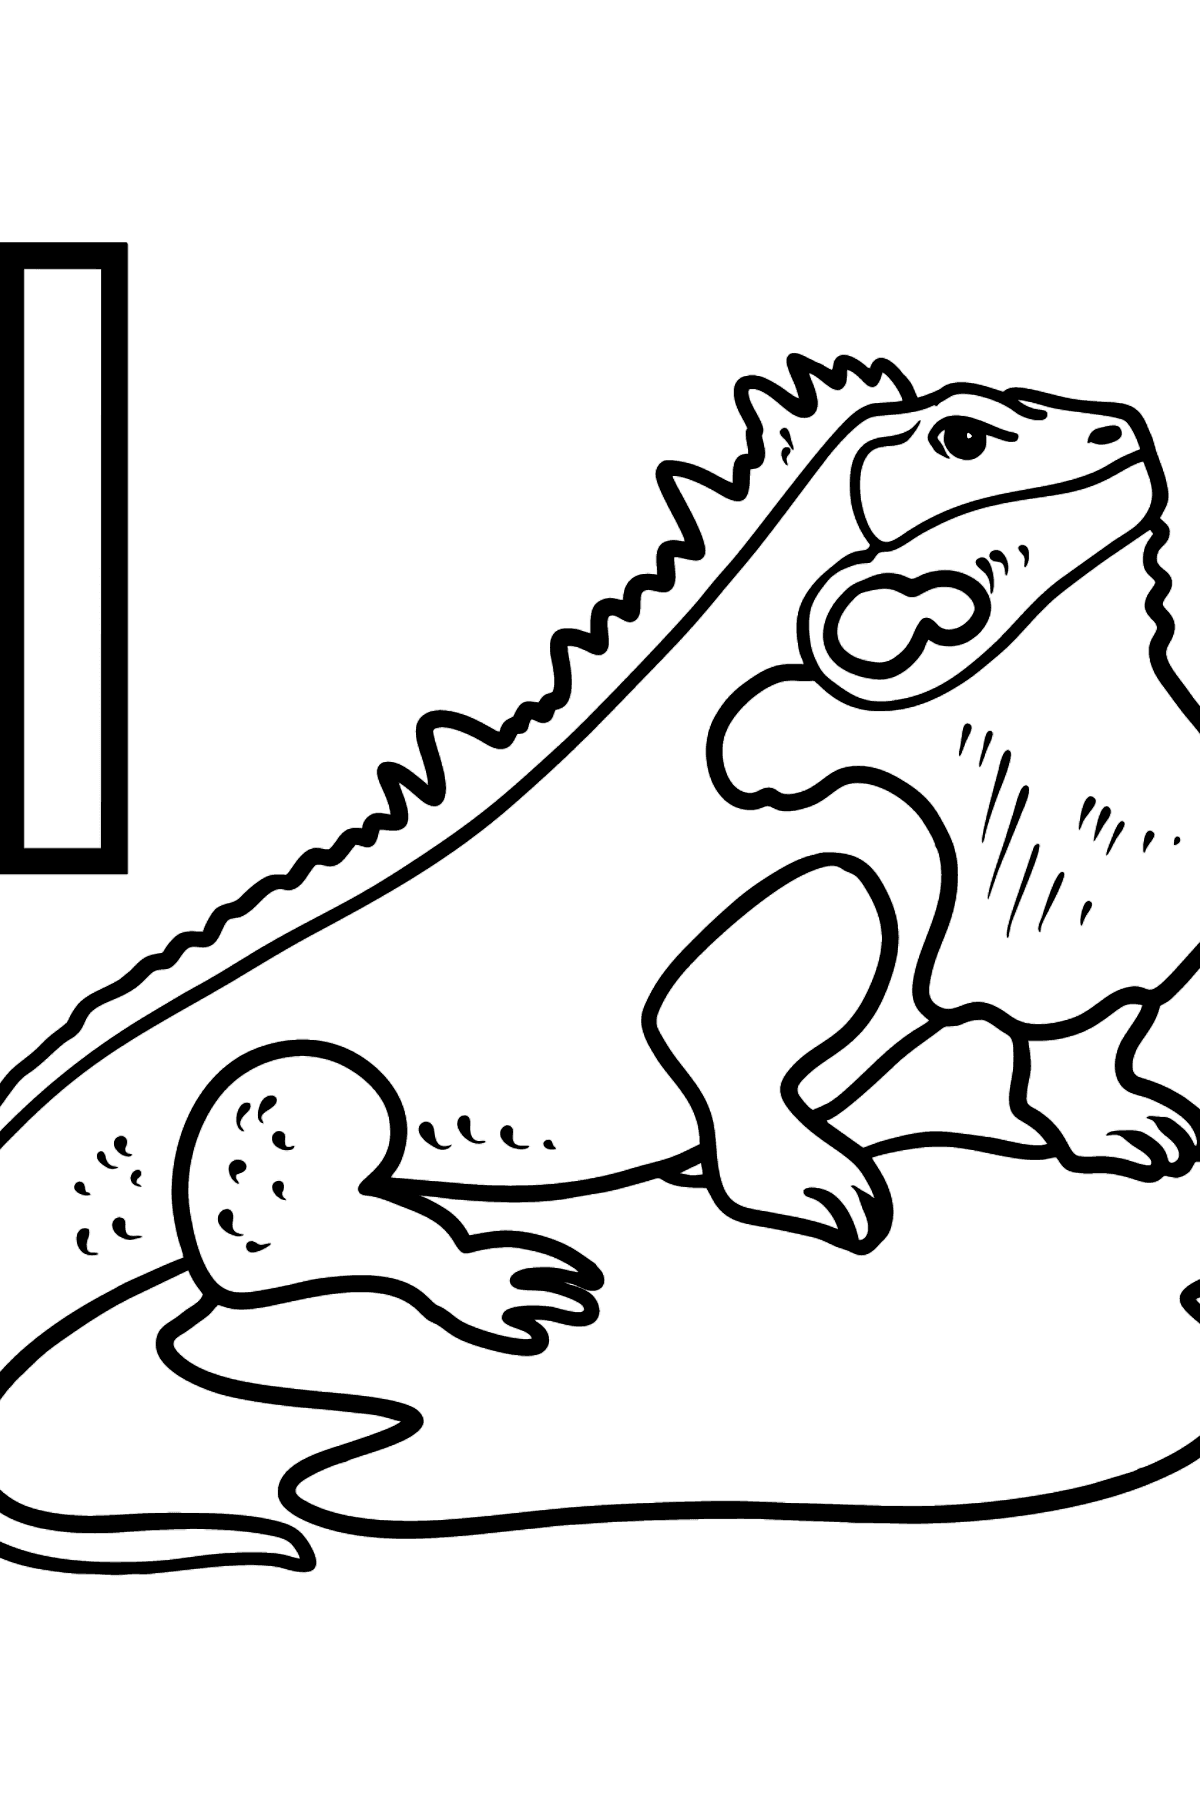 Portuguese Letter I coloring pages - IGUANA - Coloring Pages for Kids